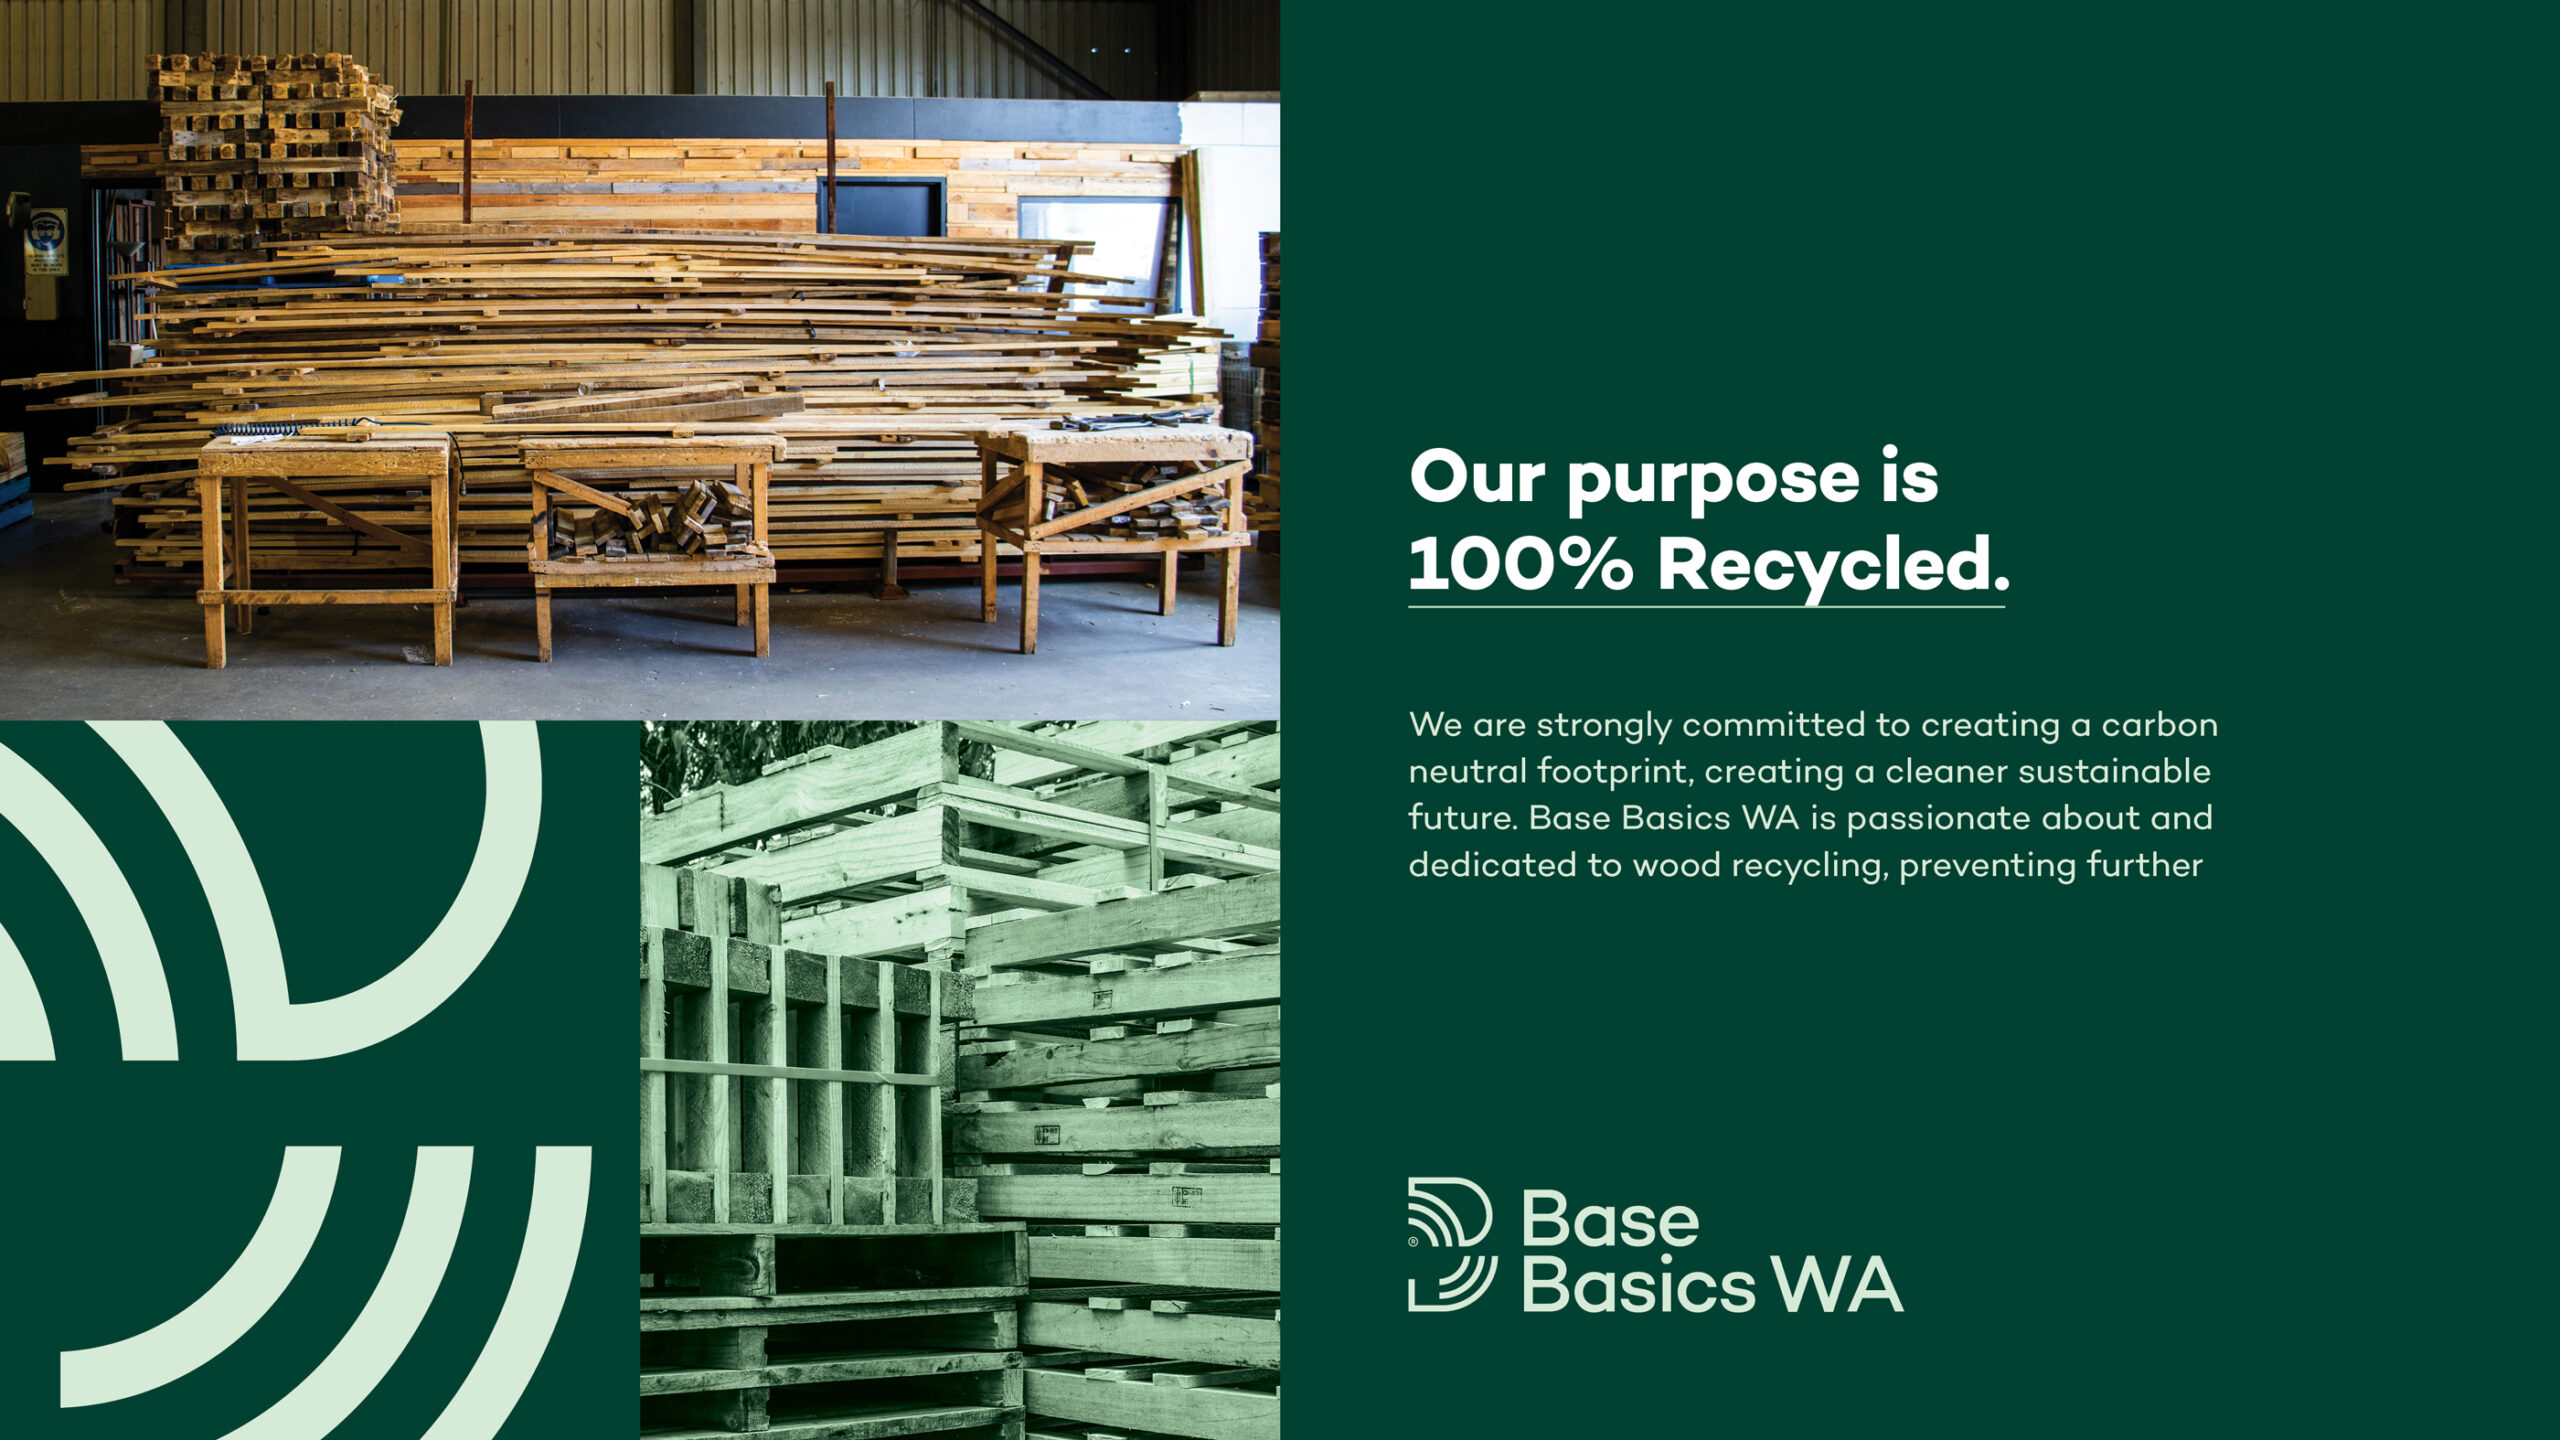 Base Basics WA, Graphic Design, Signage, Website and Branding Design and Development by TL Design Co.